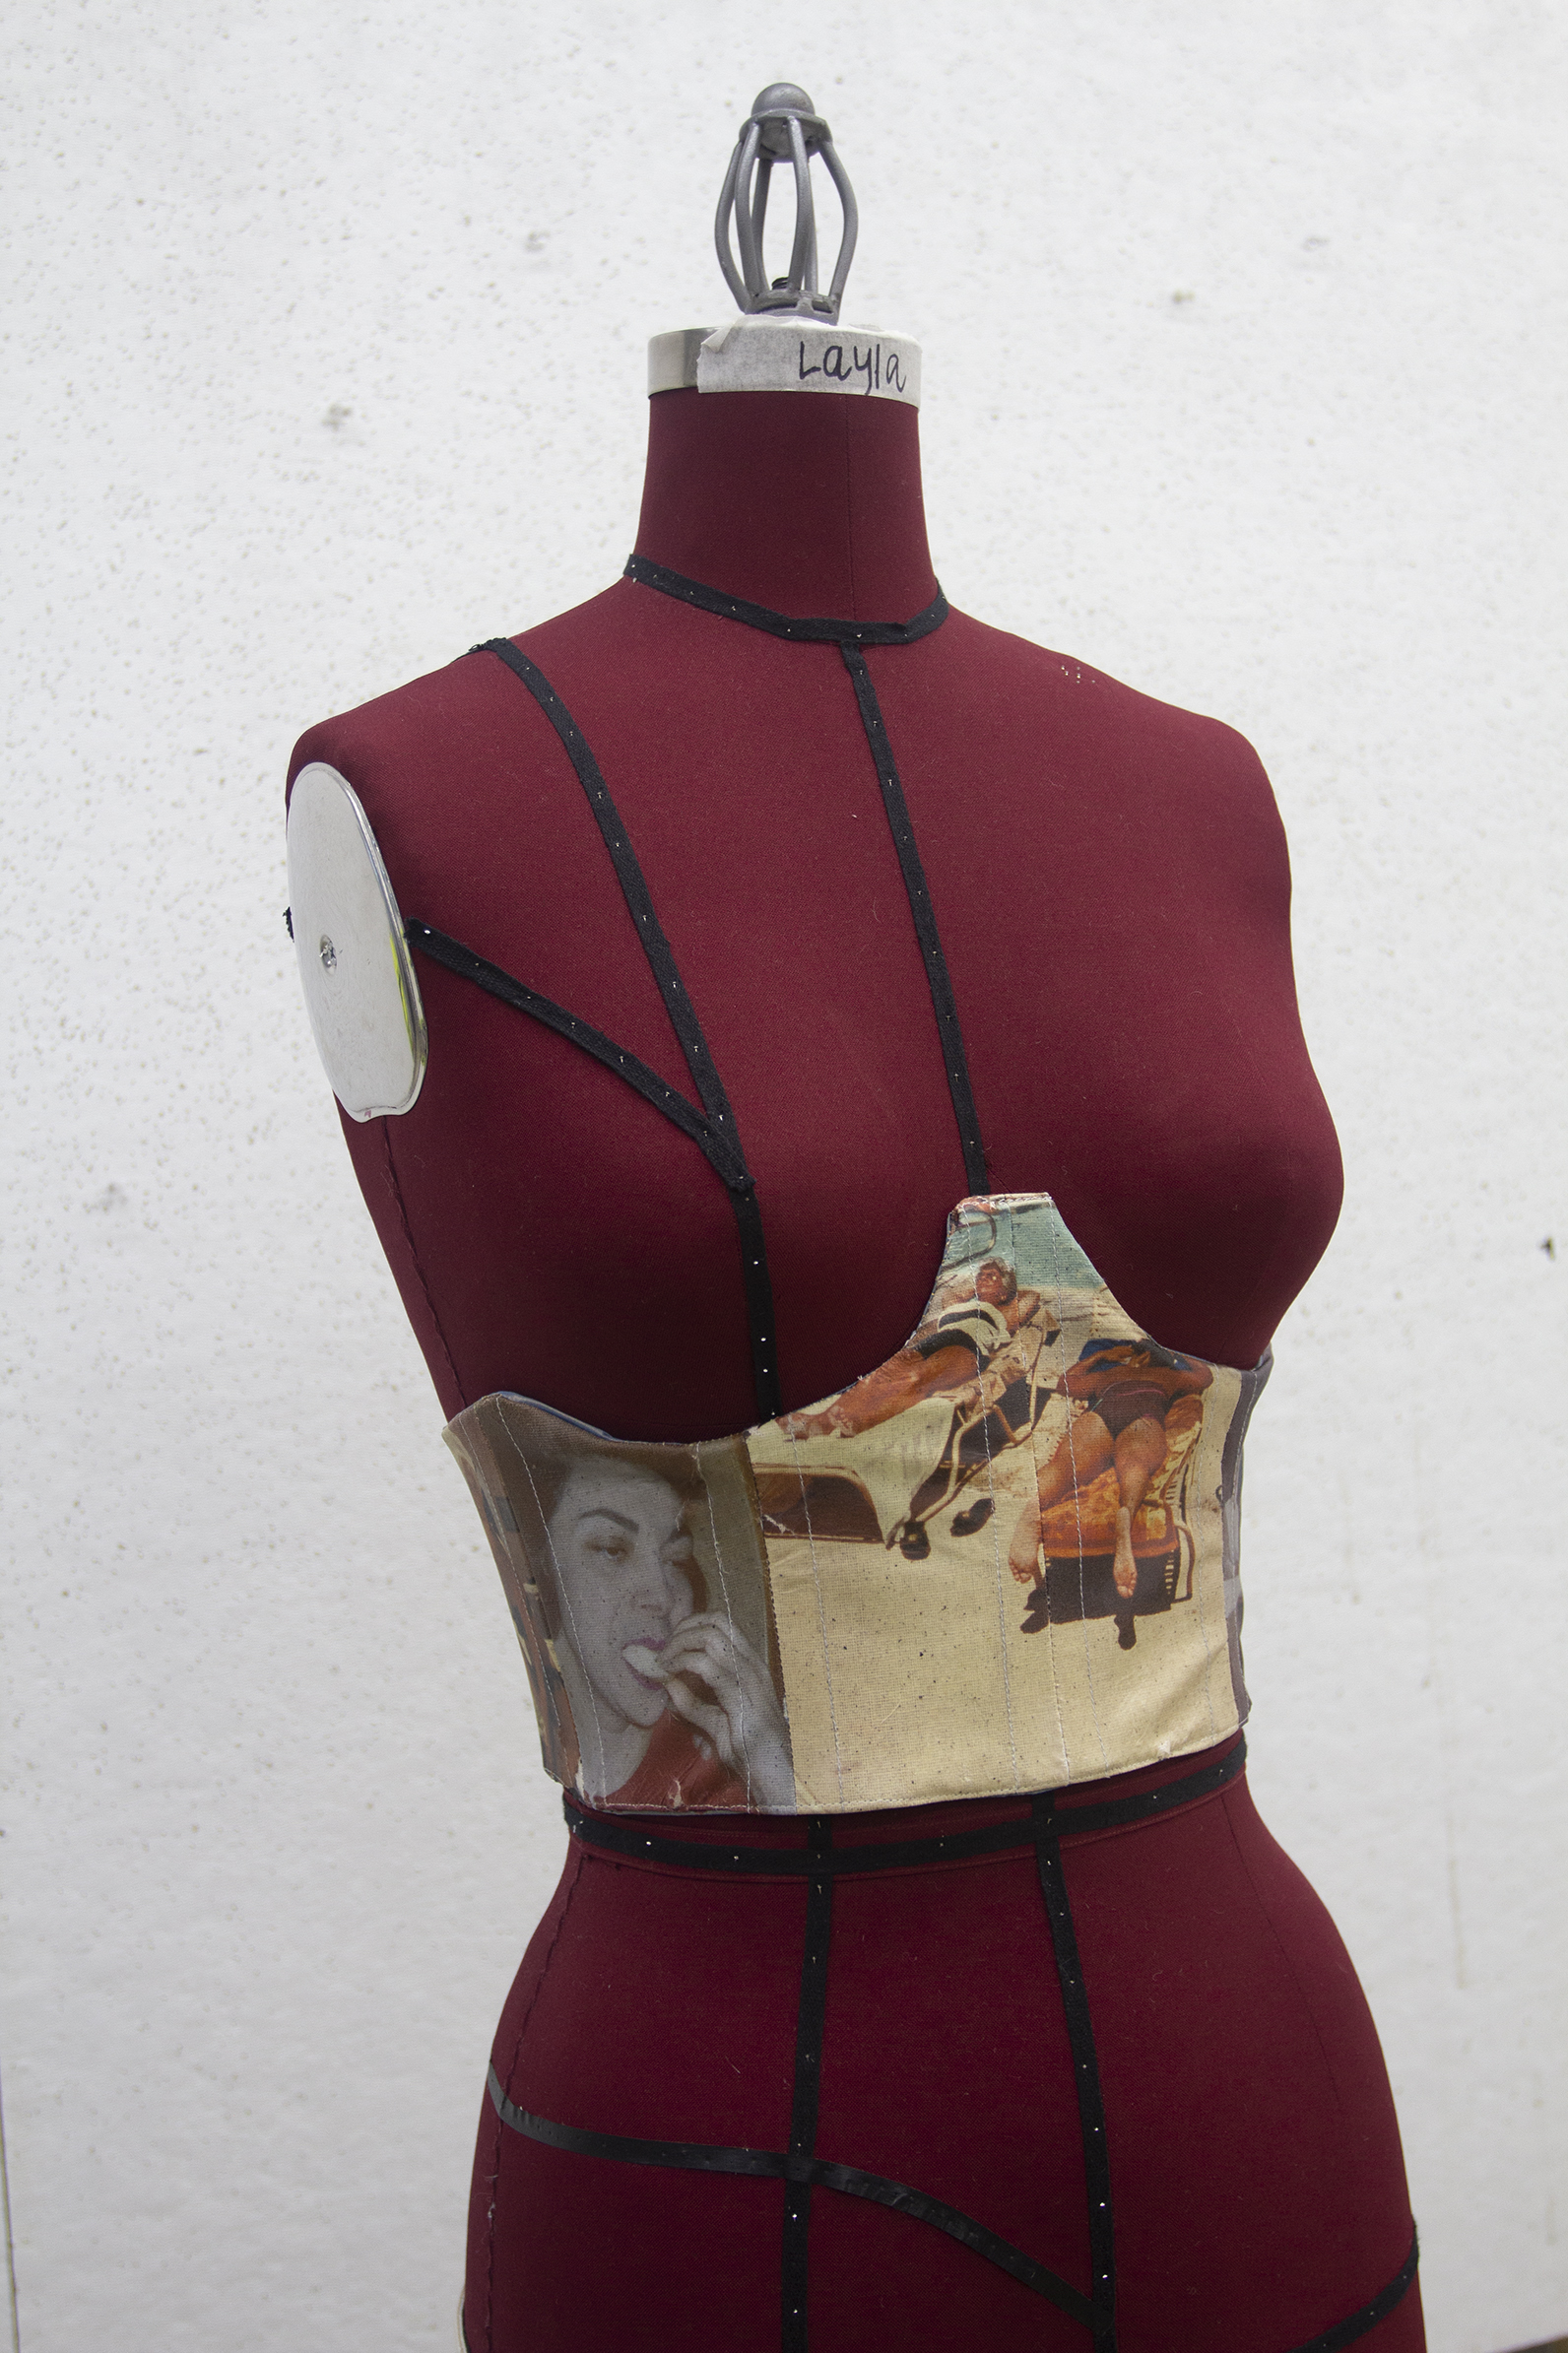 A photograph of a mannequin made out of other photographs